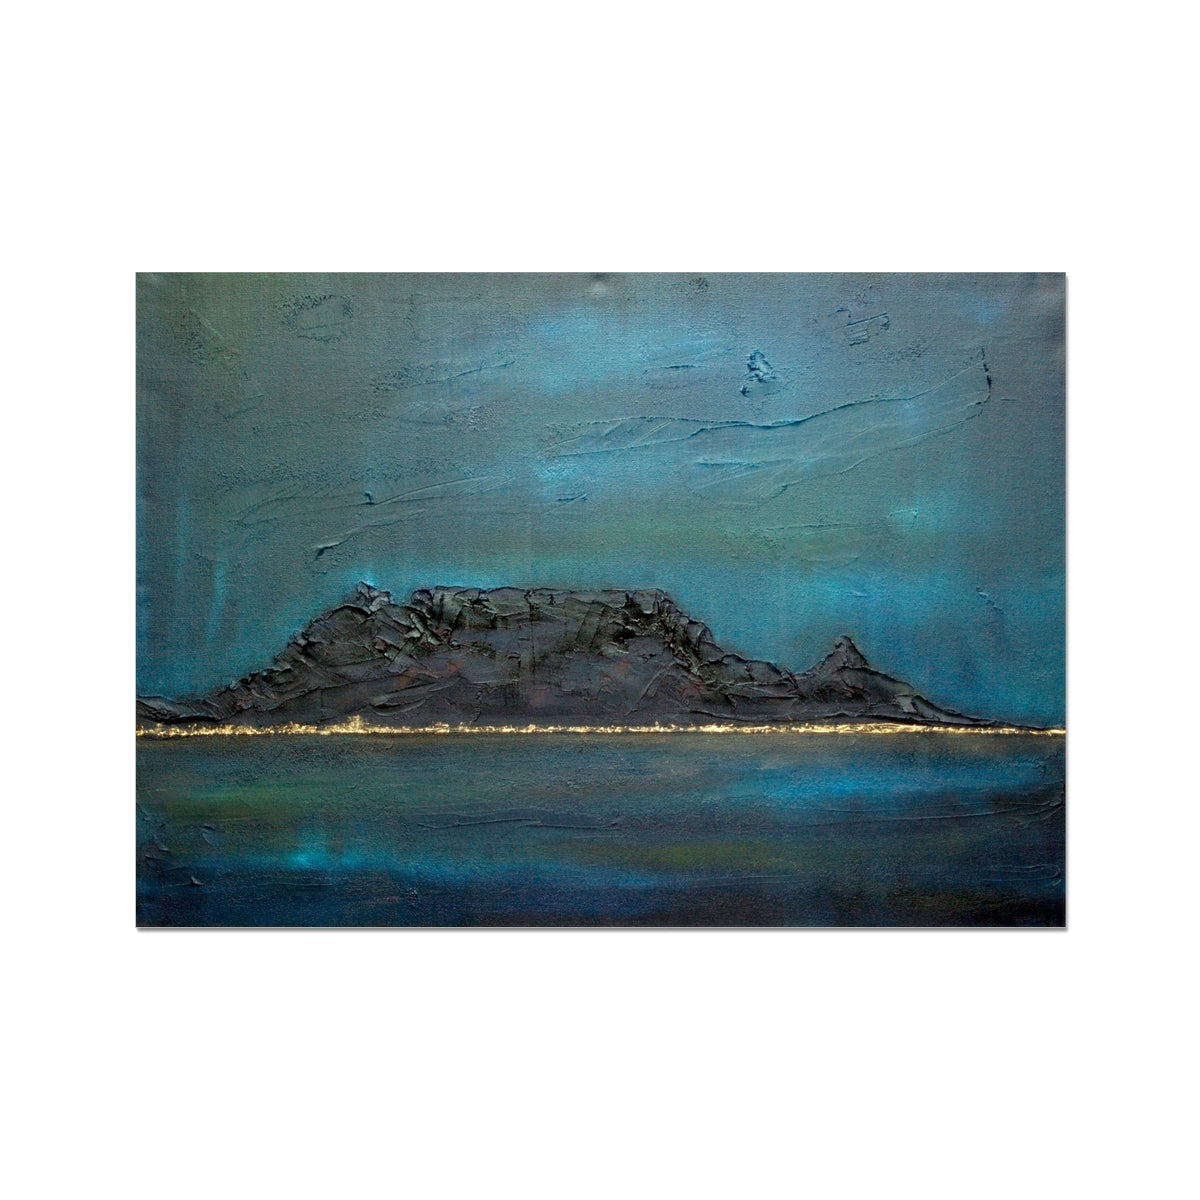 Table Mountain Dusk Painting | Fine Art Prints From Scotland-Unframed Prints-World Art Gallery-A2 Landscape-Paintings, Prints, Homeware, Art Gifts From Scotland By Scottish Artist Kevin Hunter